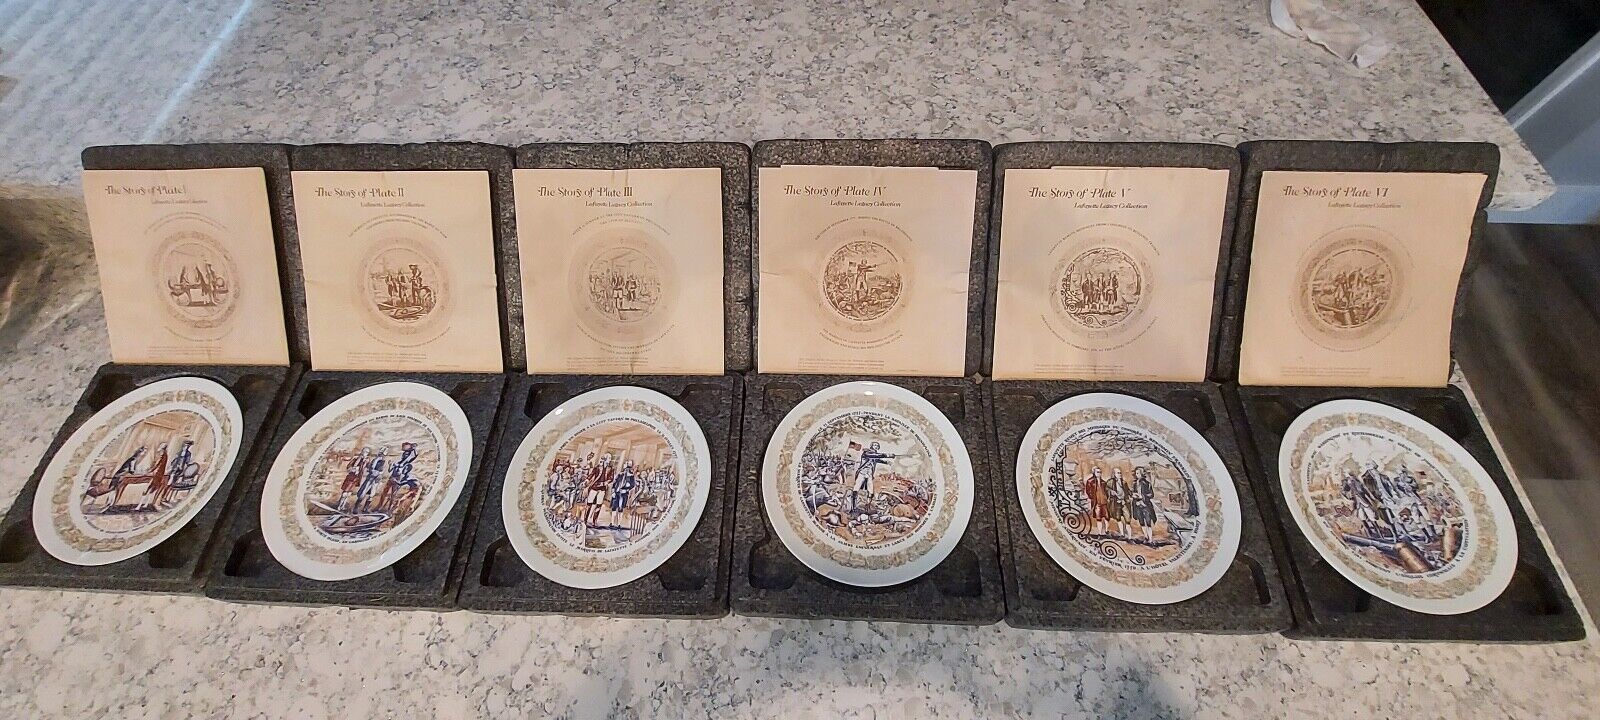 Limoges Lafayette Legacy Plate Collection of 6 vintage history depicted Bradford